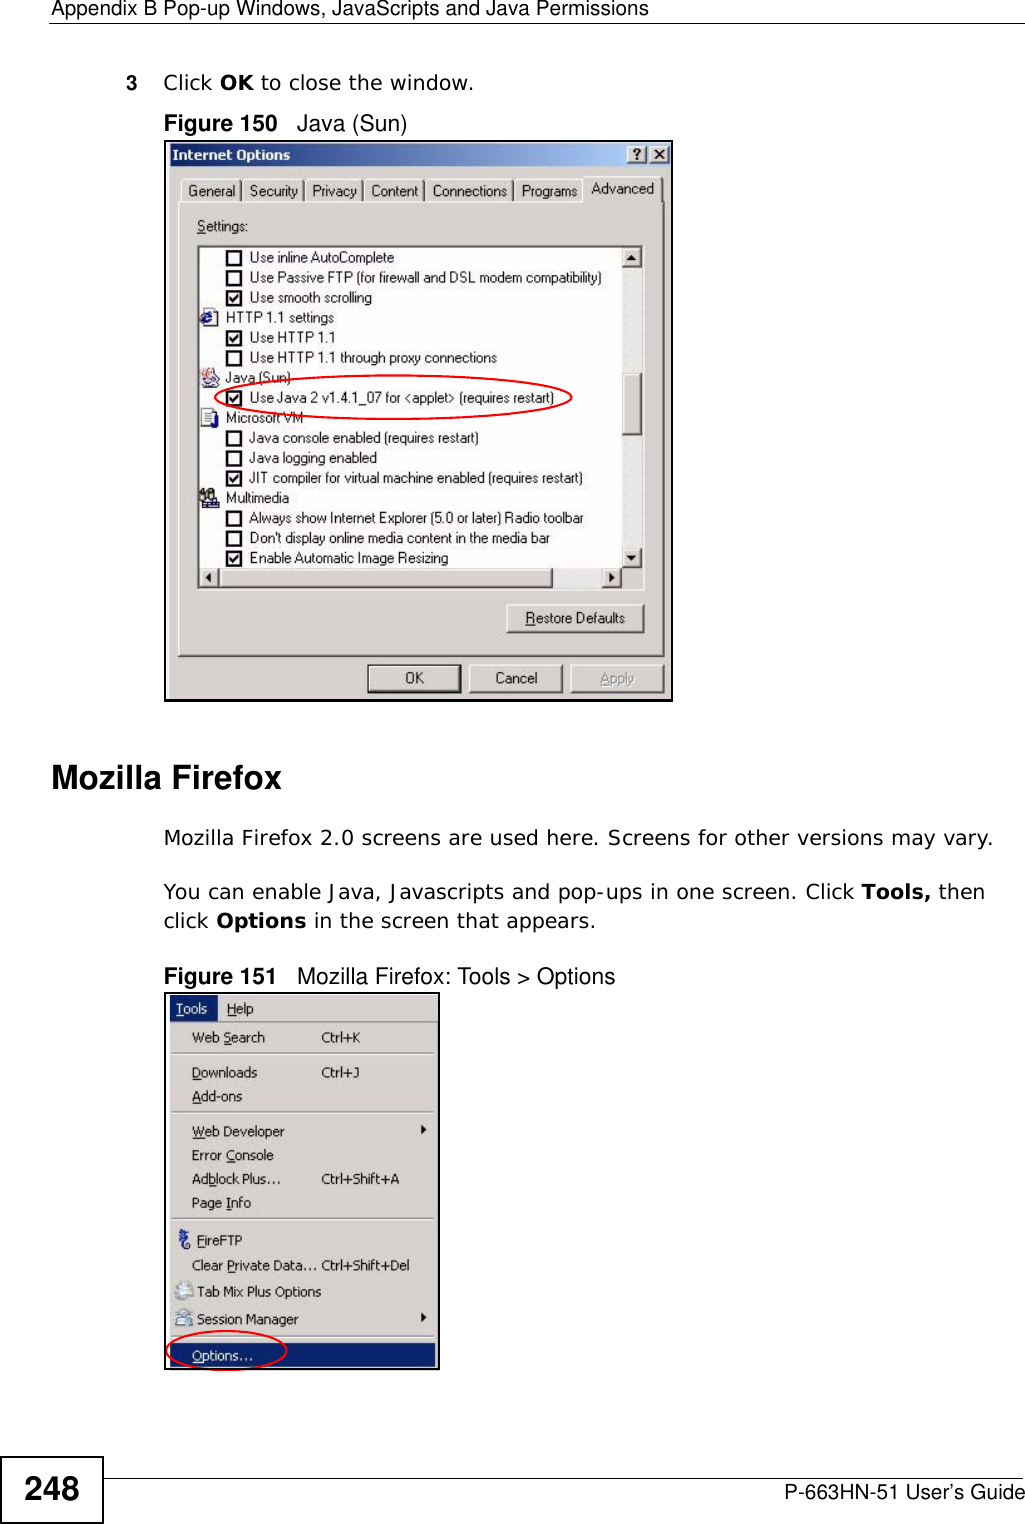 Appendix B Pop-up Windows, JavaScripts and Java PermissionsP-663HN-51 User’s Guide2483Click OK to close the window.Figure 150   Java (Sun)Mozilla FirefoxMozilla Firefox 2.0 screens are used here. Screens for other versions may vary. You can enable Java, Javascripts and pop-ups in one screen. Click Tools, then click Options in the screen that appears.Figure 151   Mozilla Firefox: Tools &gt; Options